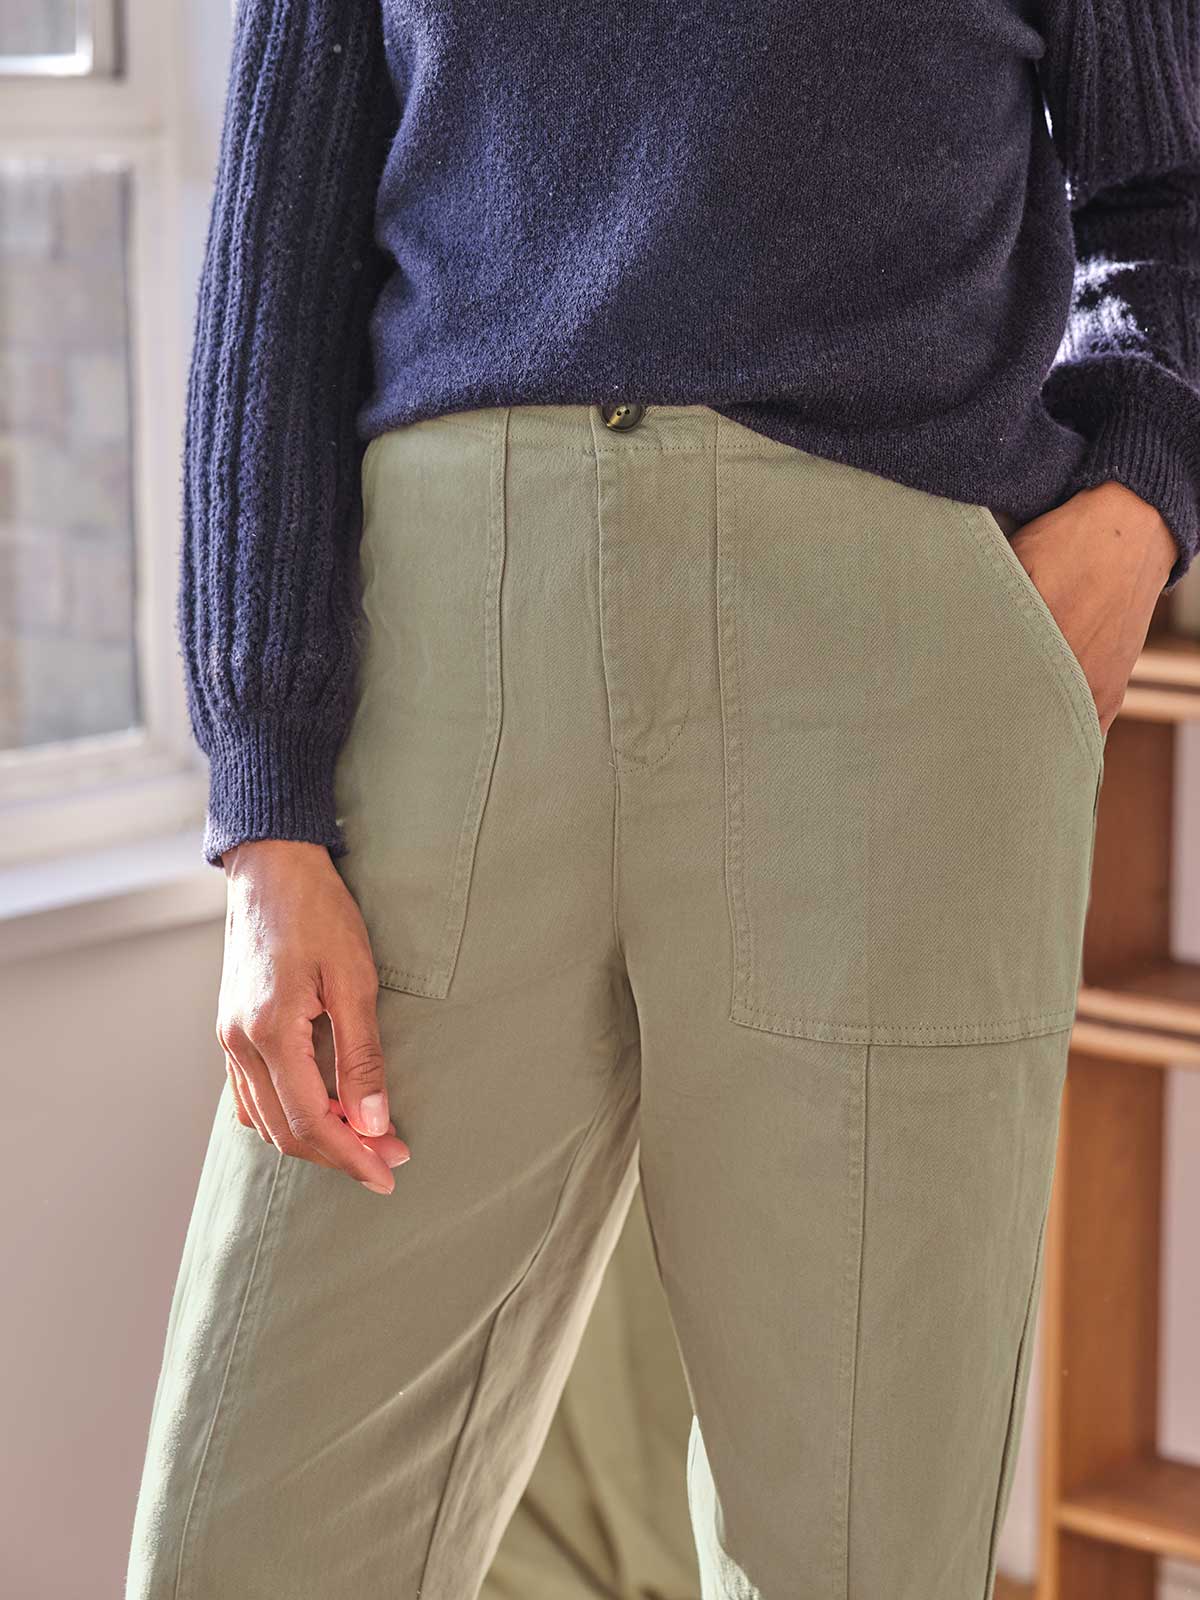 Women Casual Corduroy Cargo Pants Tapered Work Trousers Loose Solid Jogger  Pants | eBay